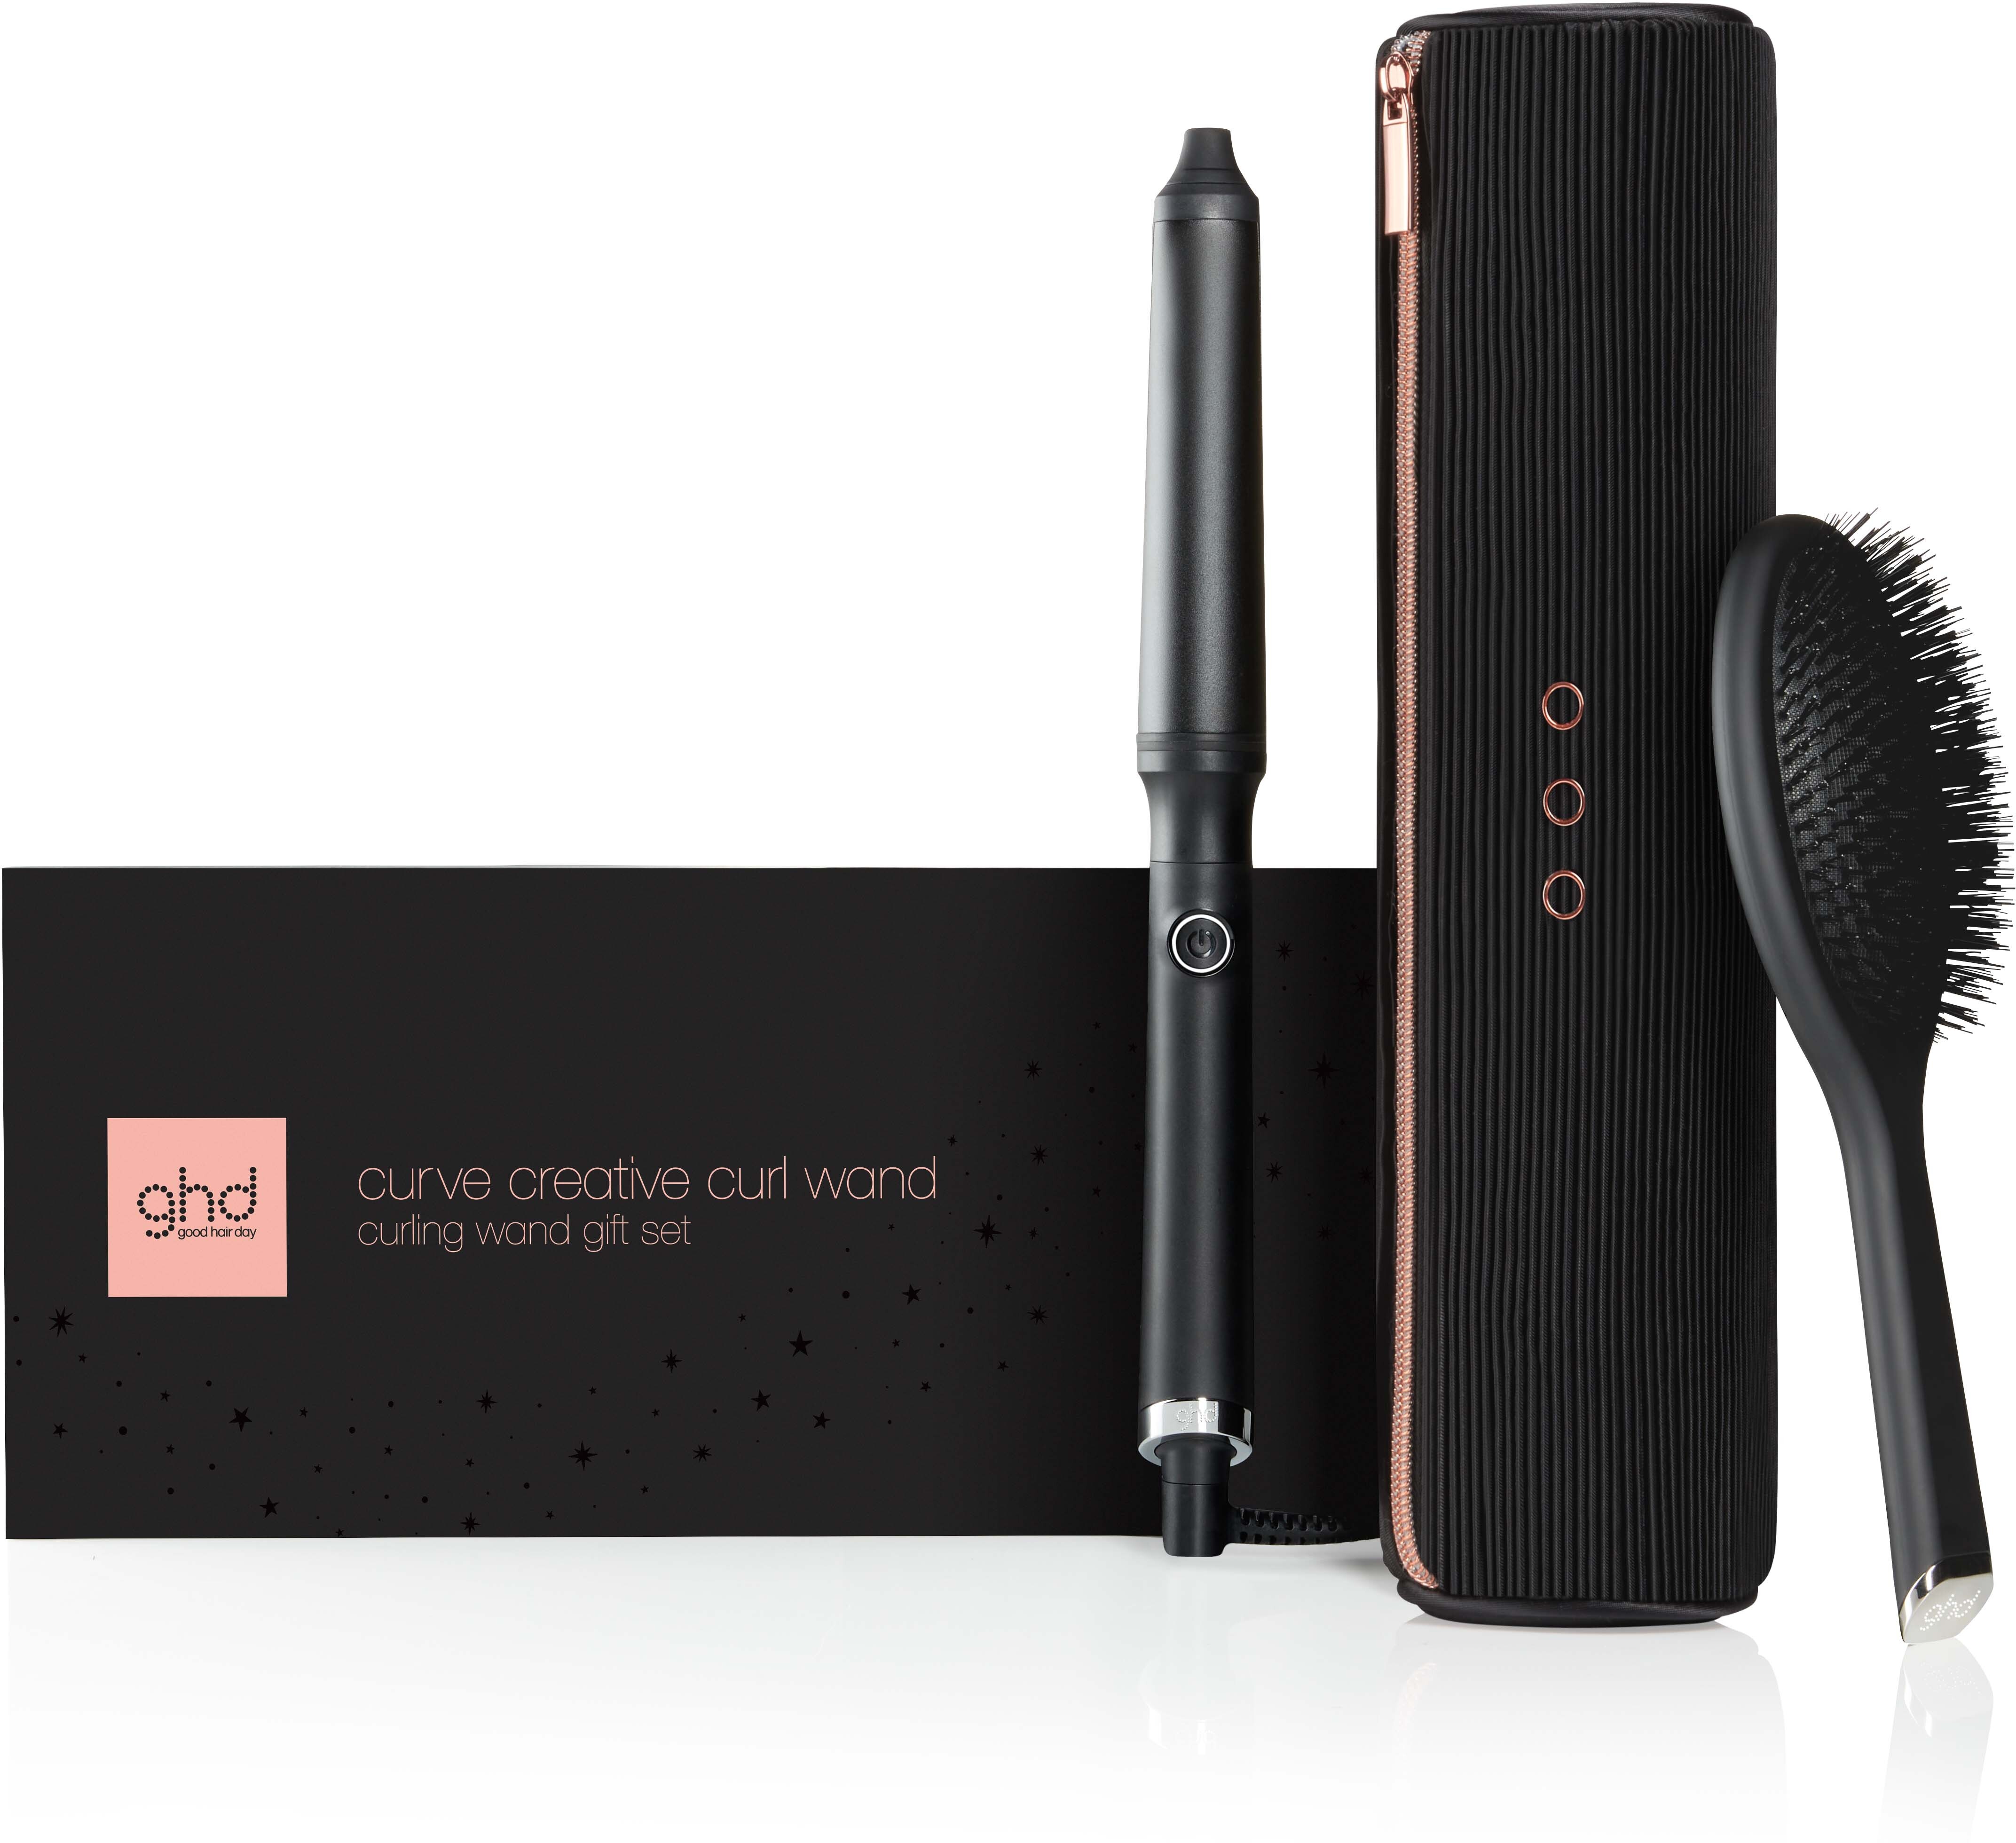 ghd Dreamland Holiday Collection Creative Curl Wand Gift Set